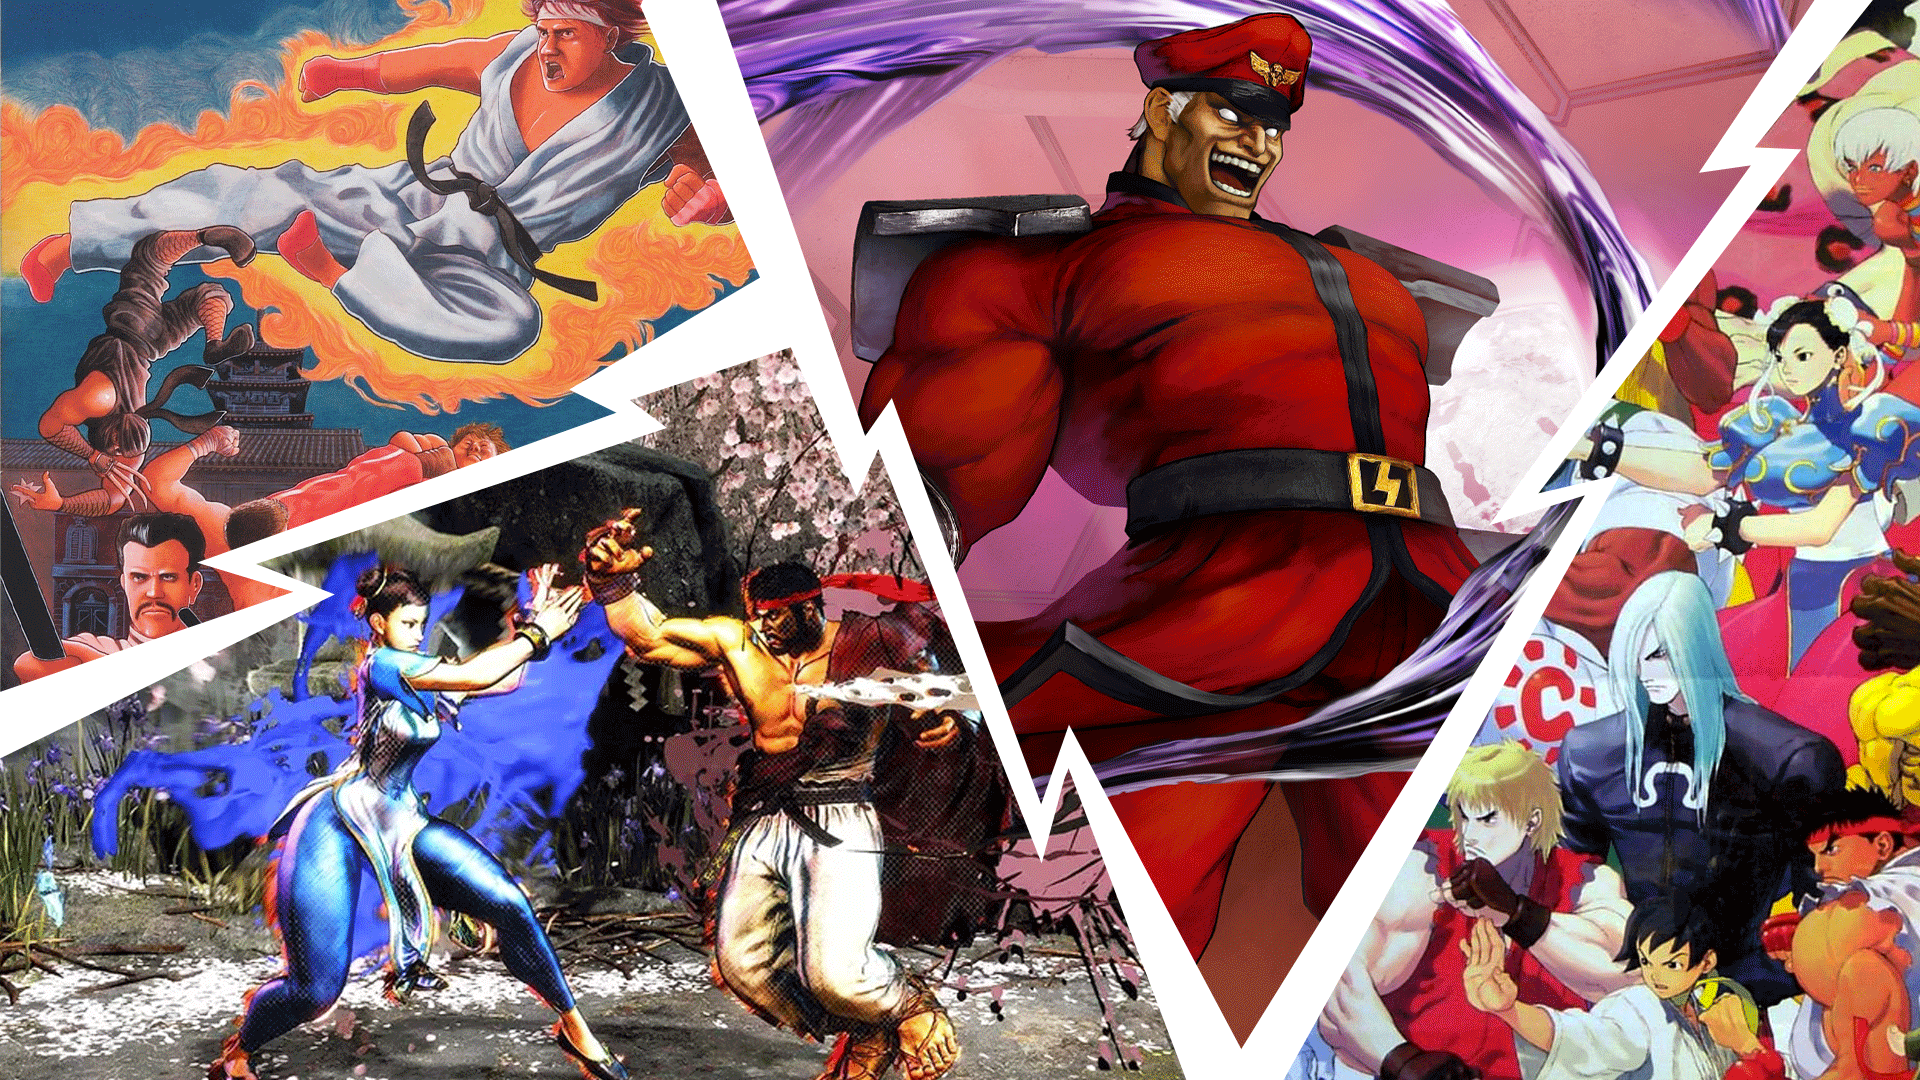 25 Years Later: Street Fighter is Oddly Entertaining and Often Hilarious